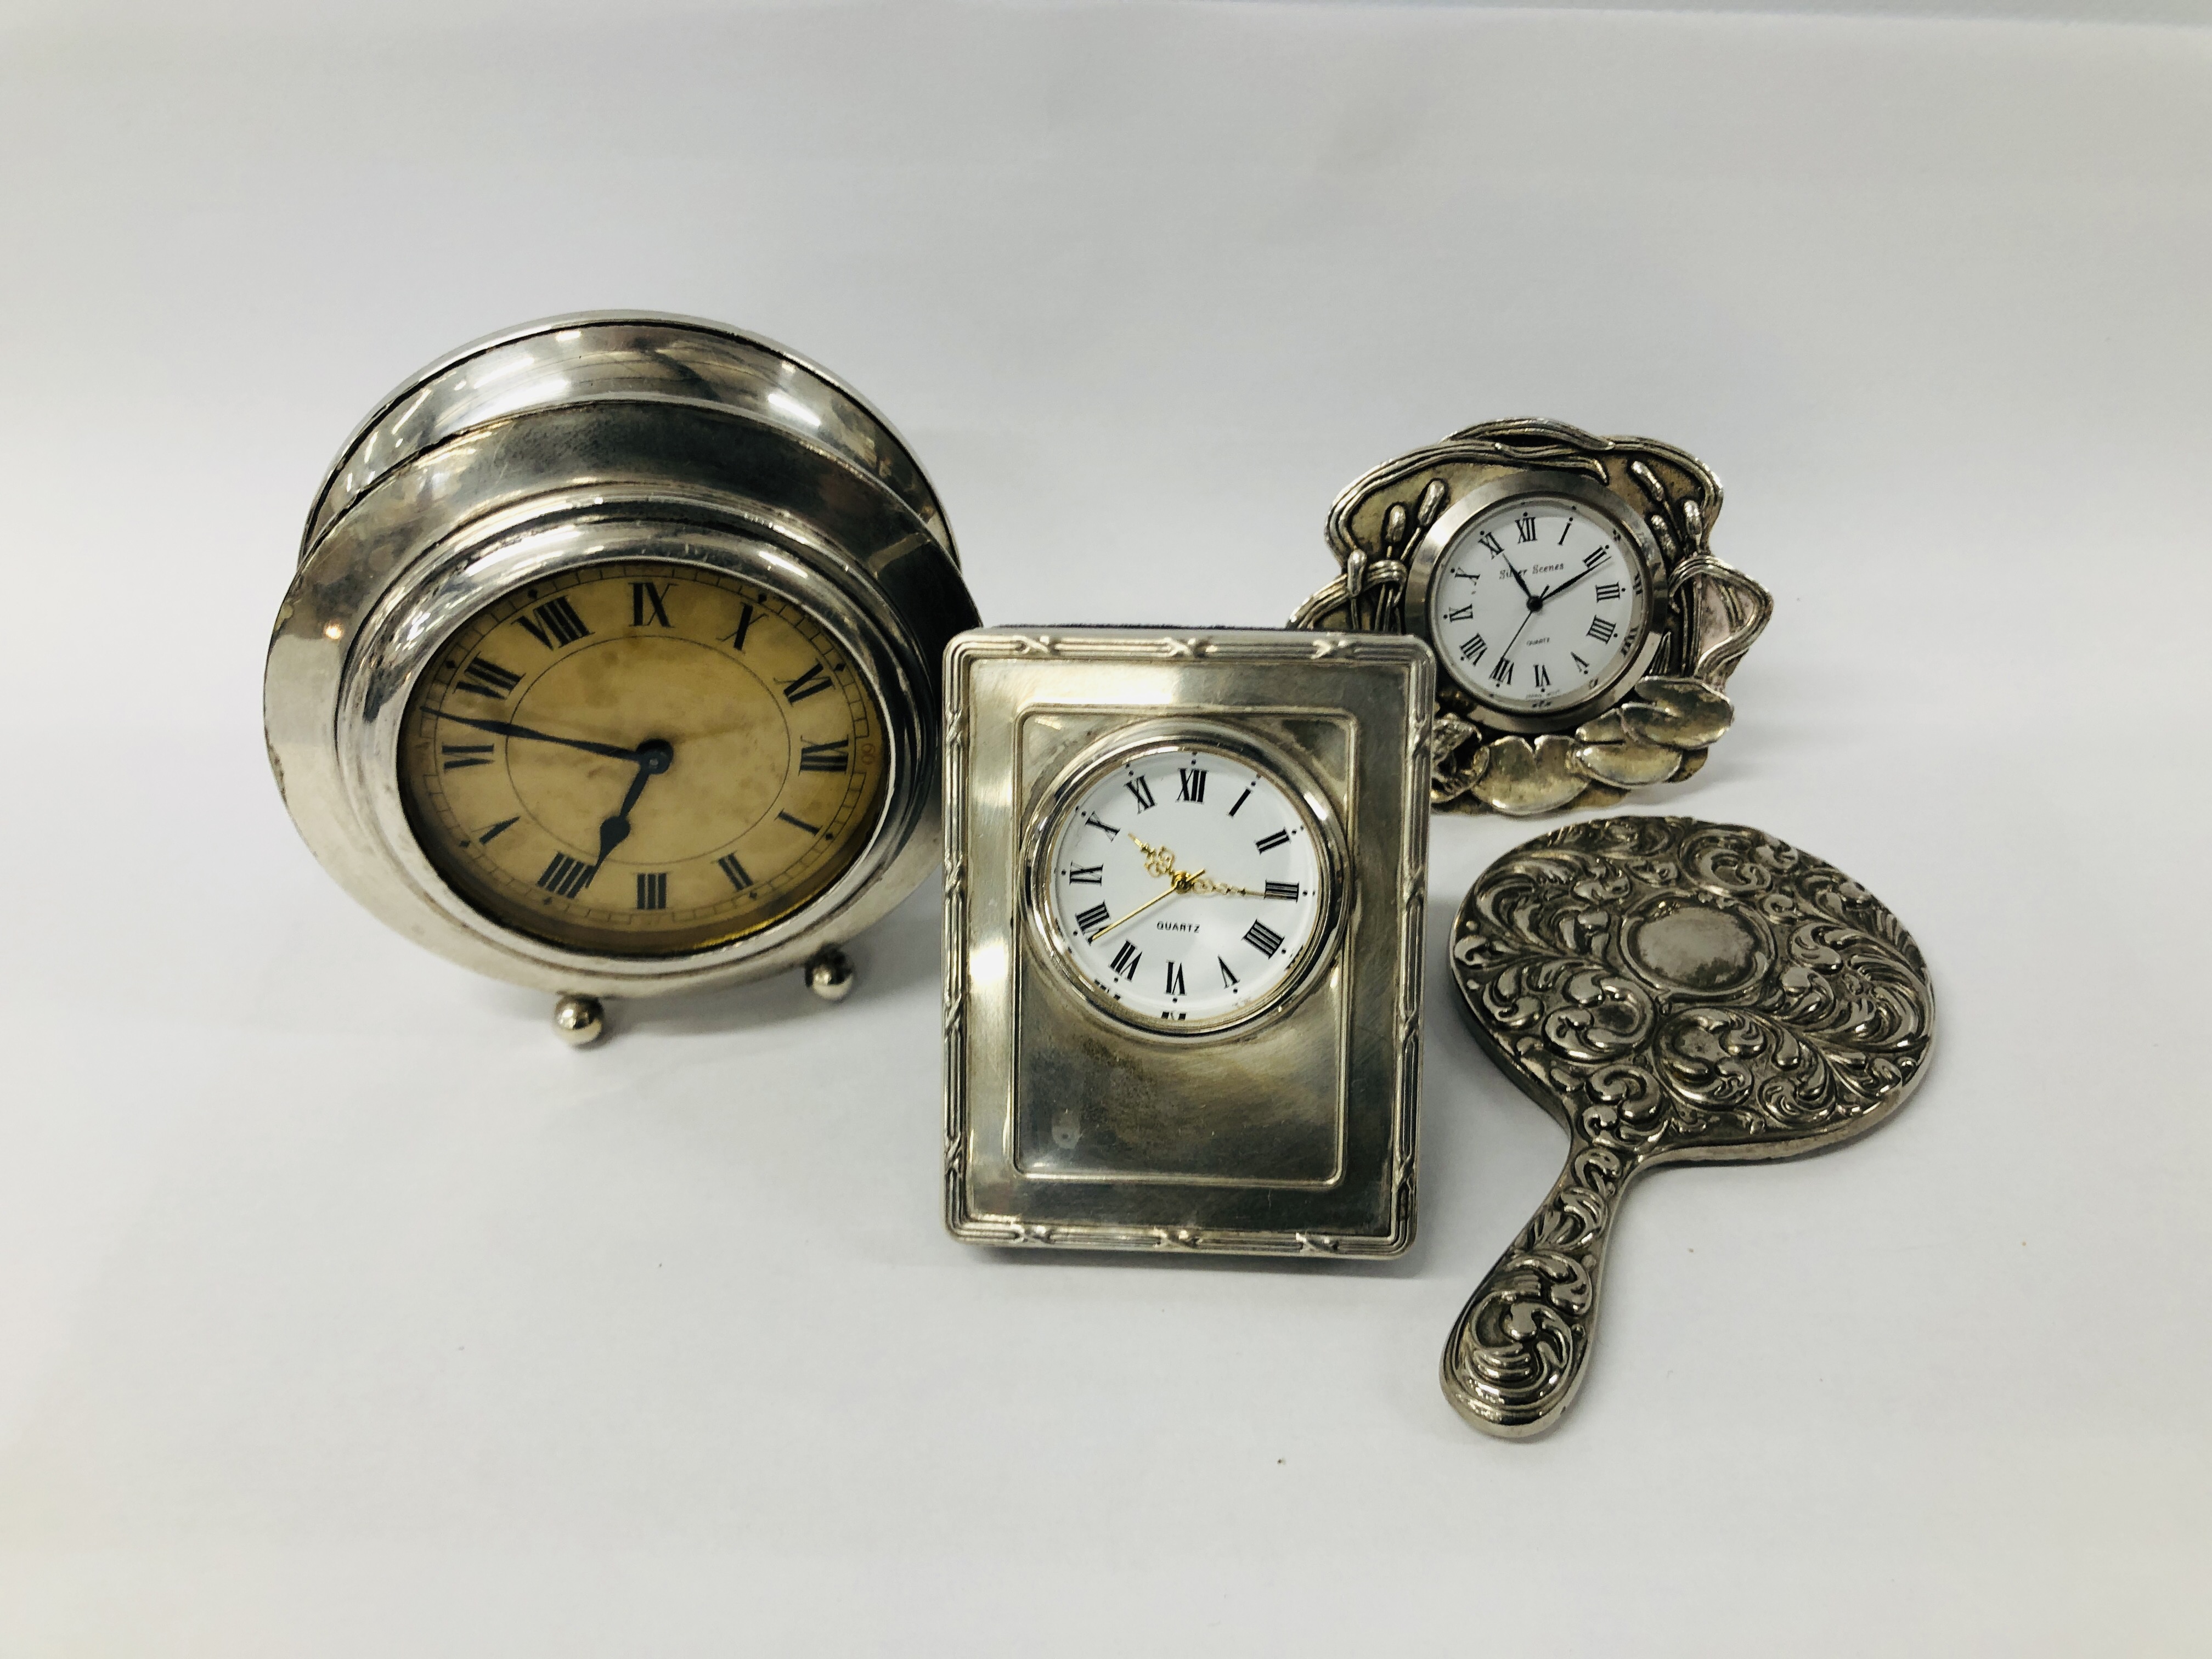 A SMALL SILVER CASED 30 HOUR BEDSIDE CLOCK ALONG WITH A SMALL QUARTZ CLOCK WITH SILVER MOUNT,